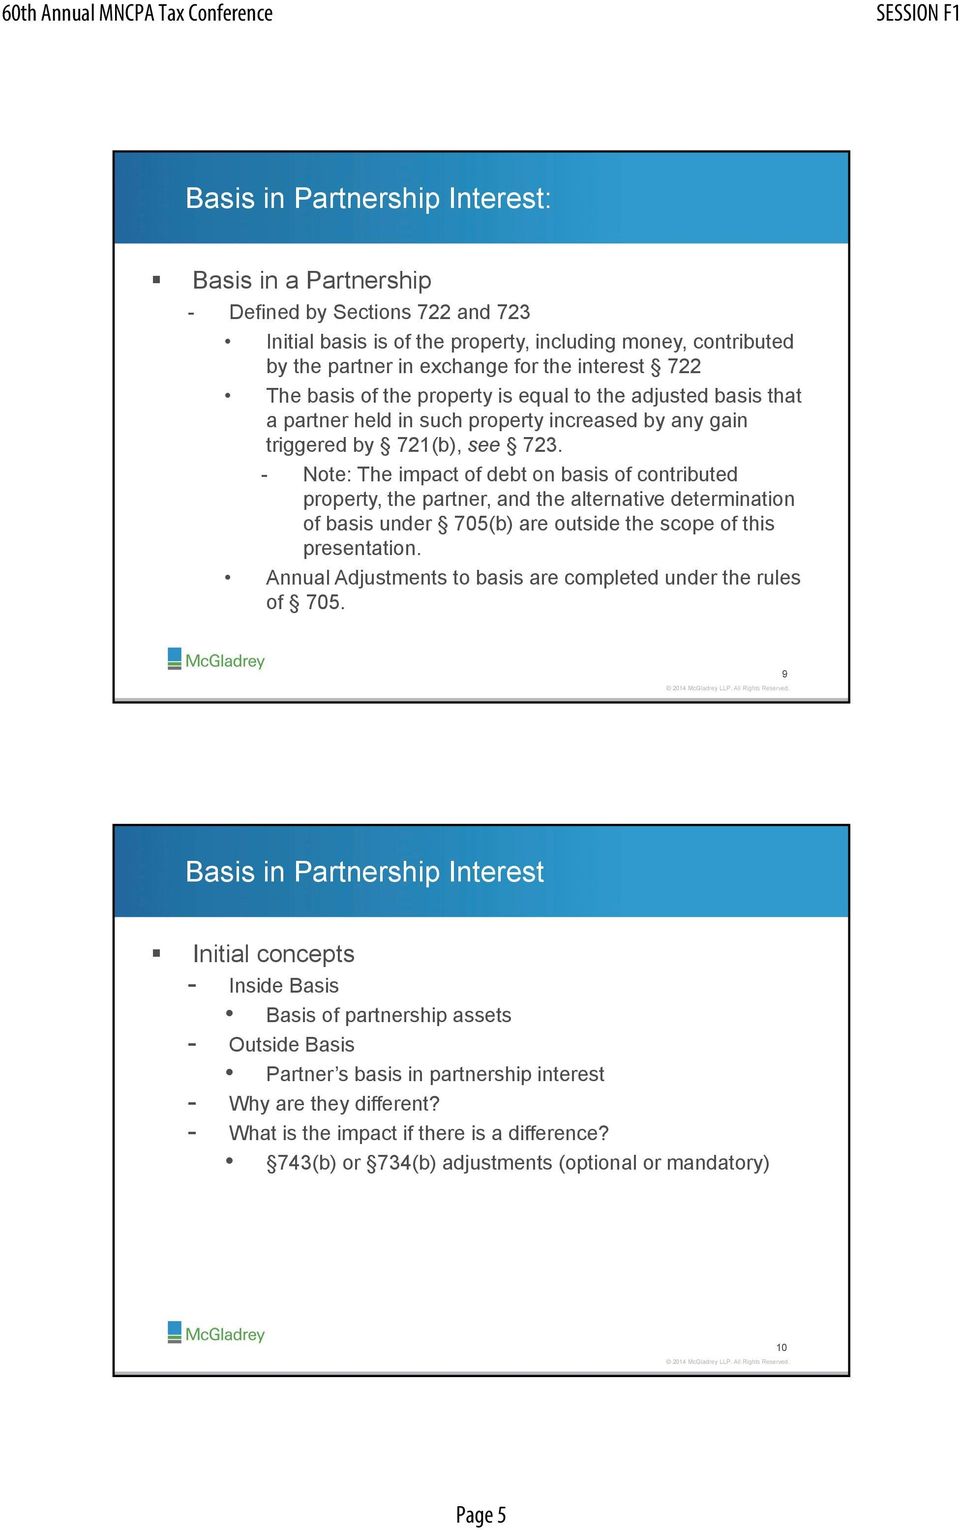 - Note: The impact of debt on basis of contributed property, the partner, and the alternative determination of basis under 705(b) are outside the scope of this presentation.